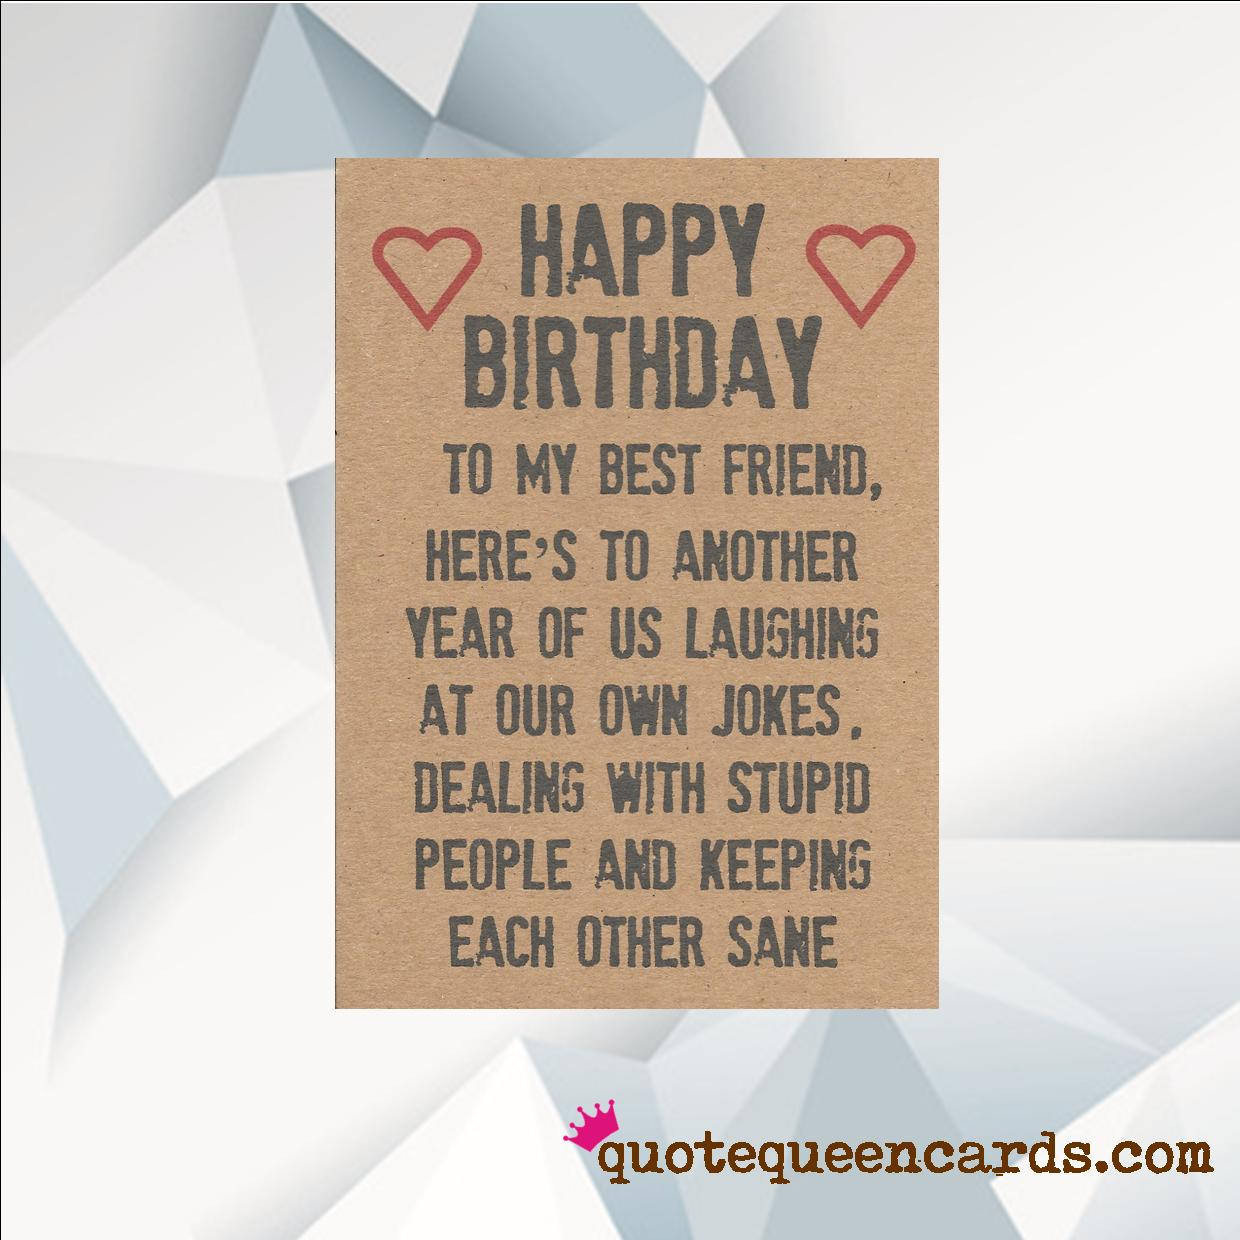 Funny Birthday Cards For Best Friend
 Happy Birthday BEST FRIEND Funny Birthday Card For Friend